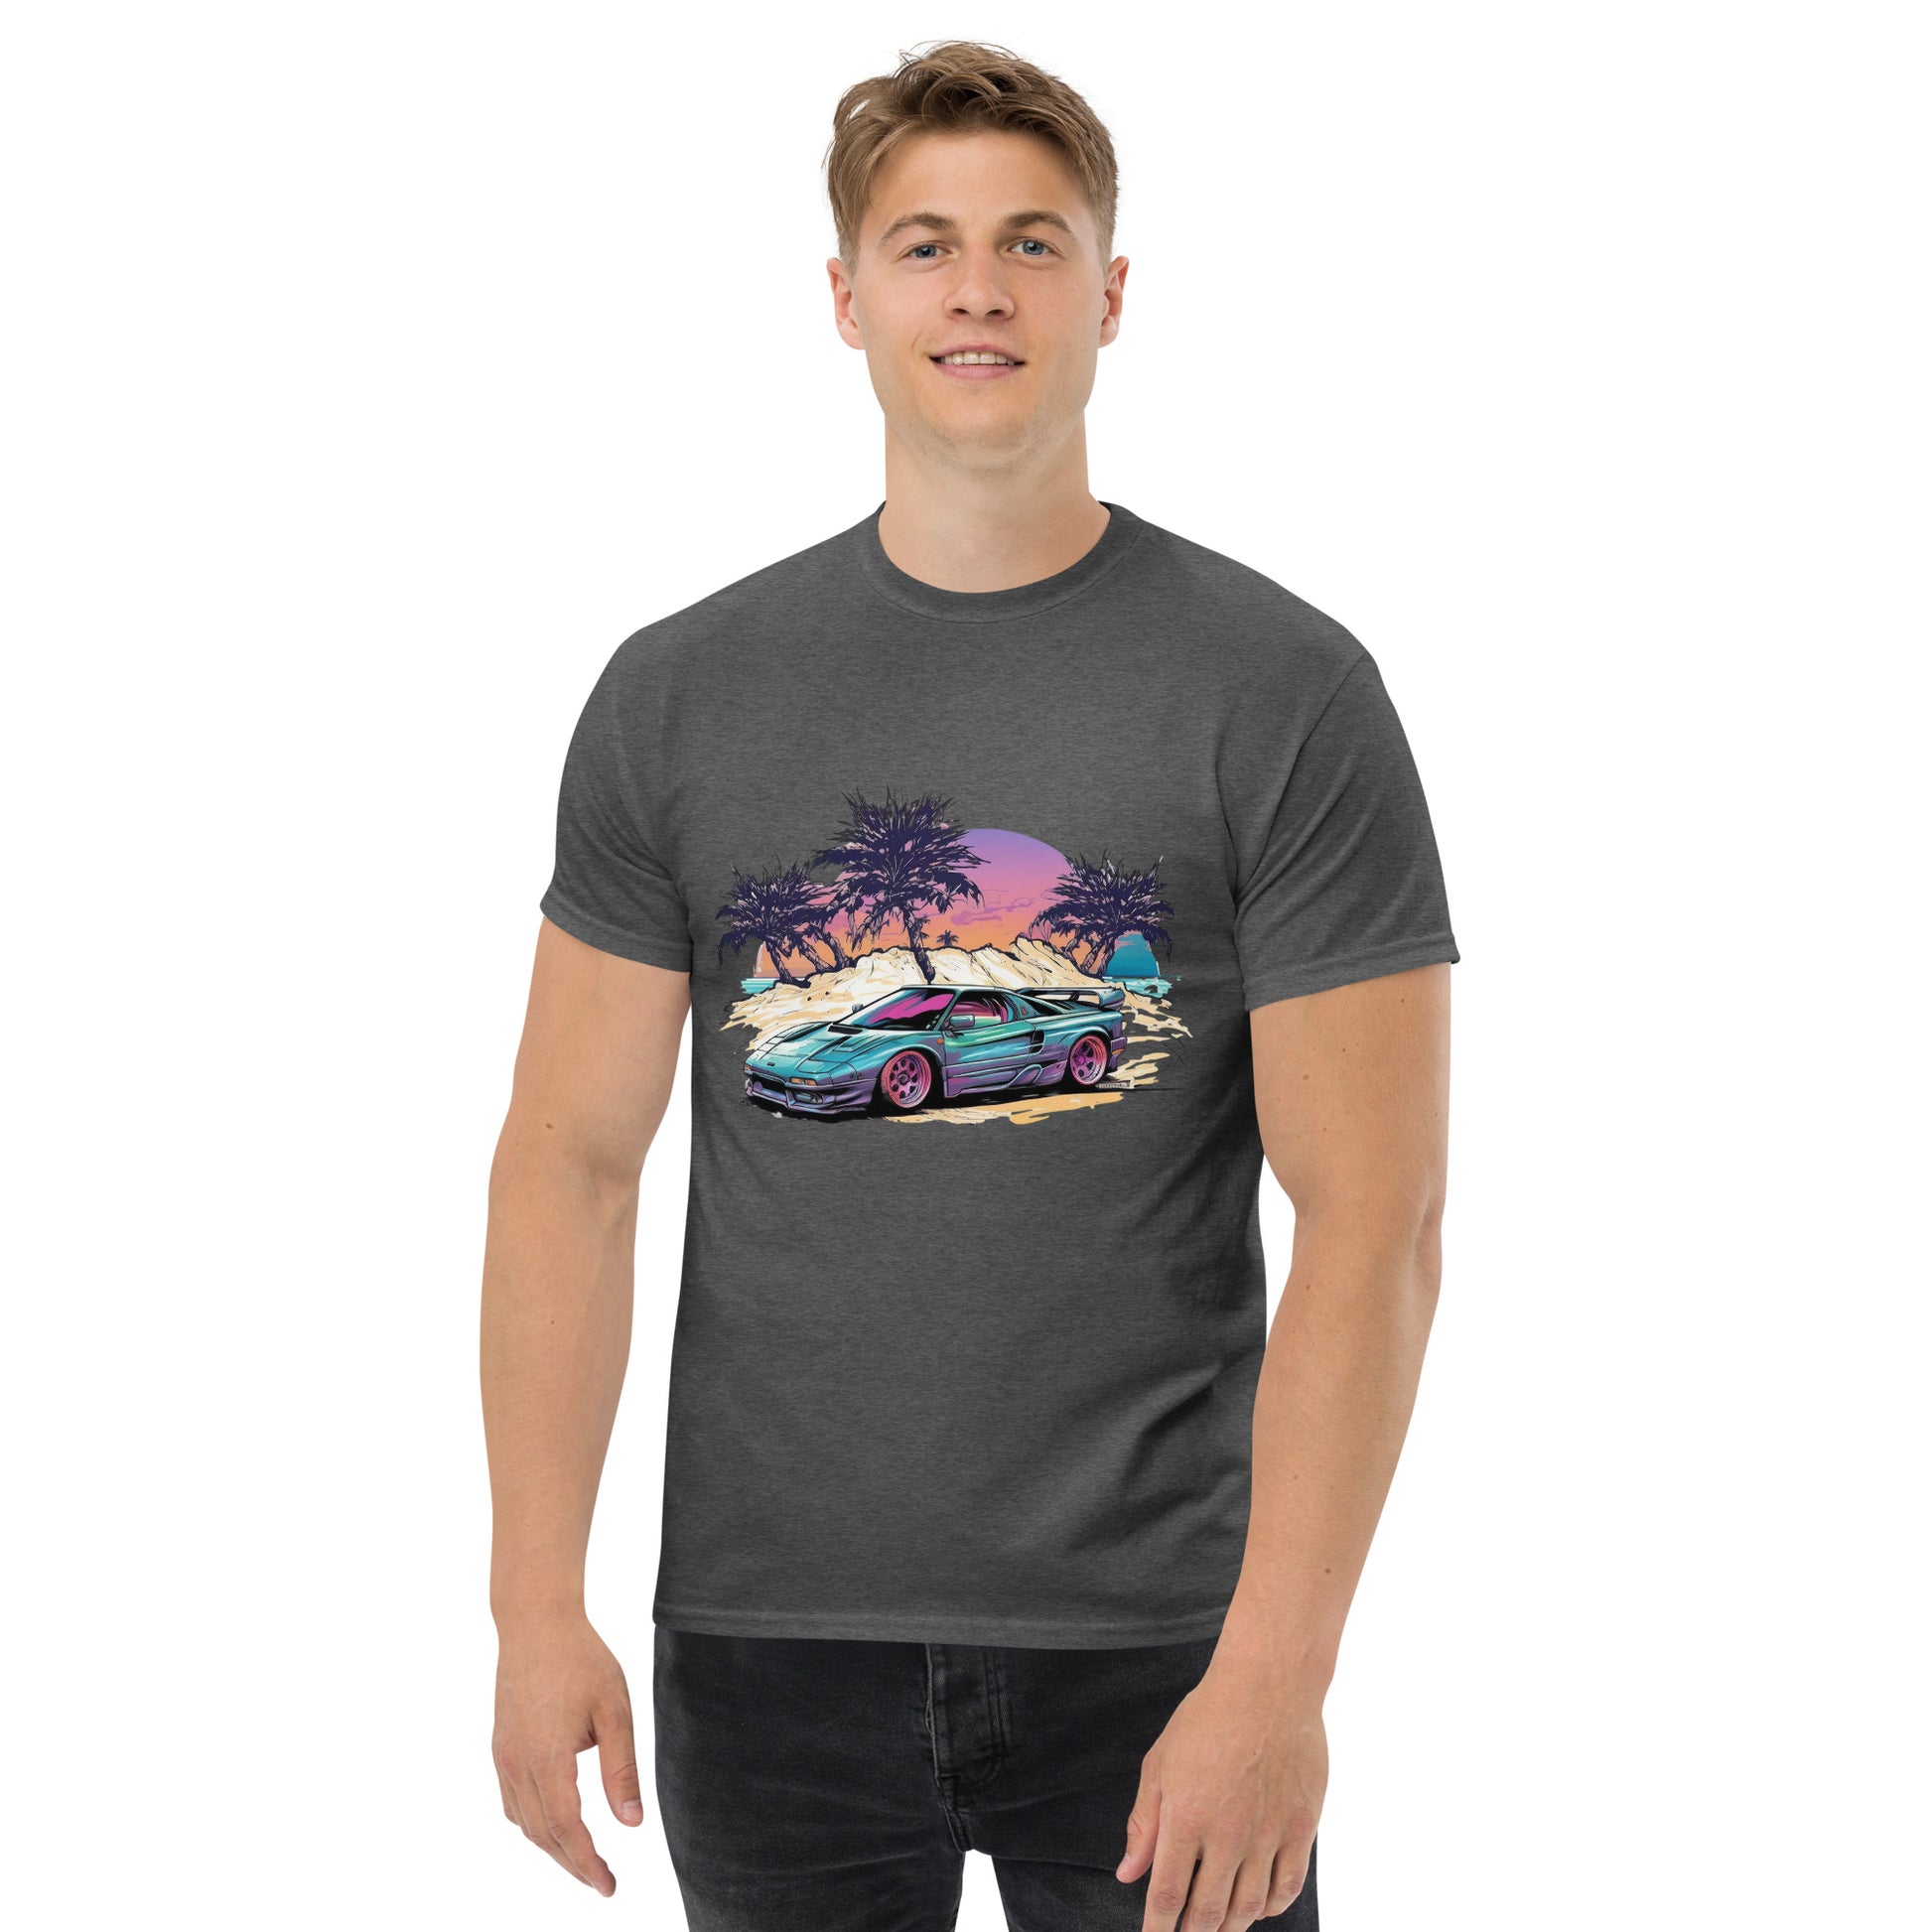 man with dark grey t-shirt with picture of vintage car in front of palm trees 